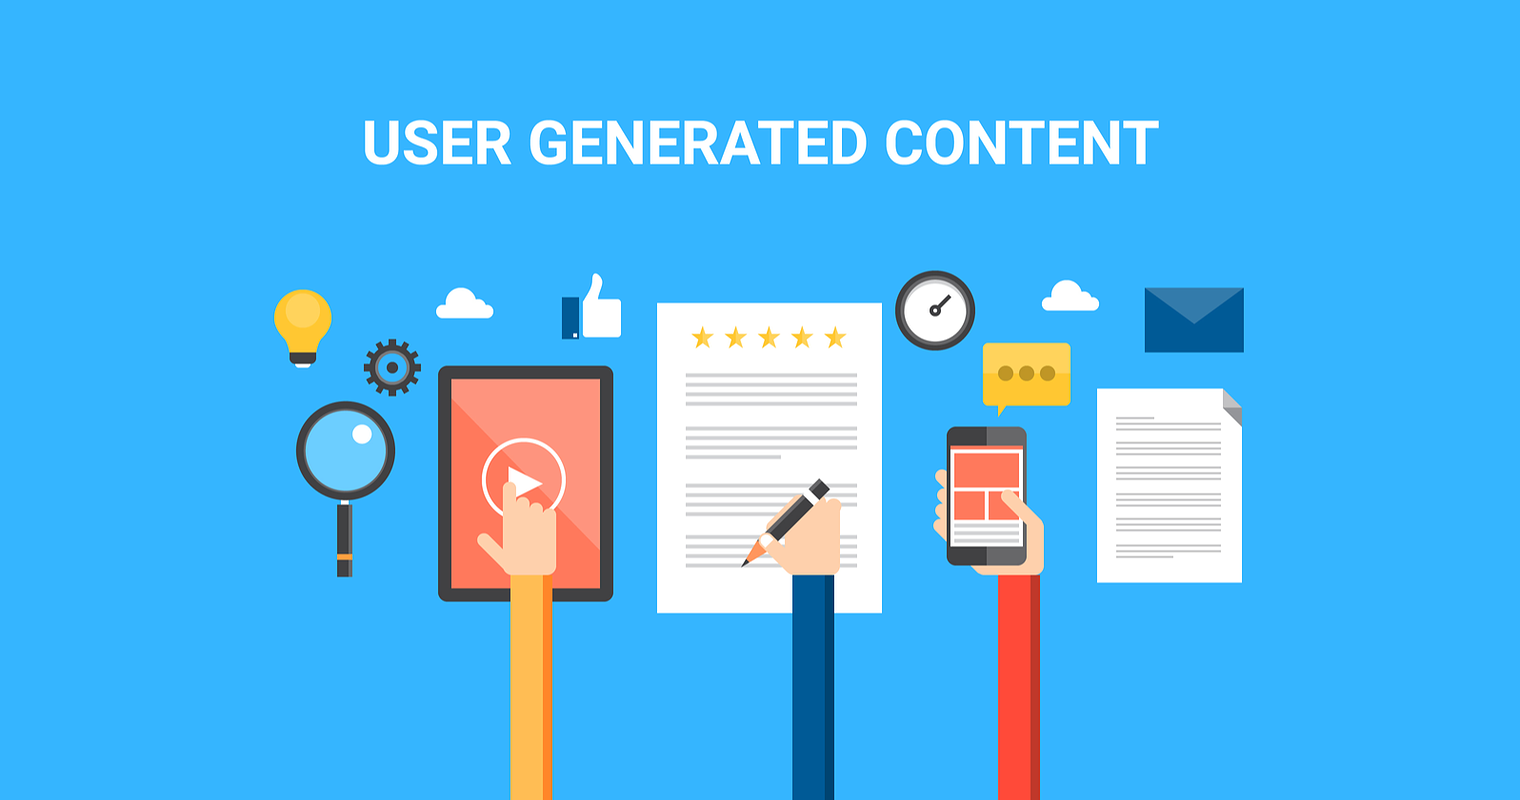 Google’s Guide To User Generated Content (UGC)